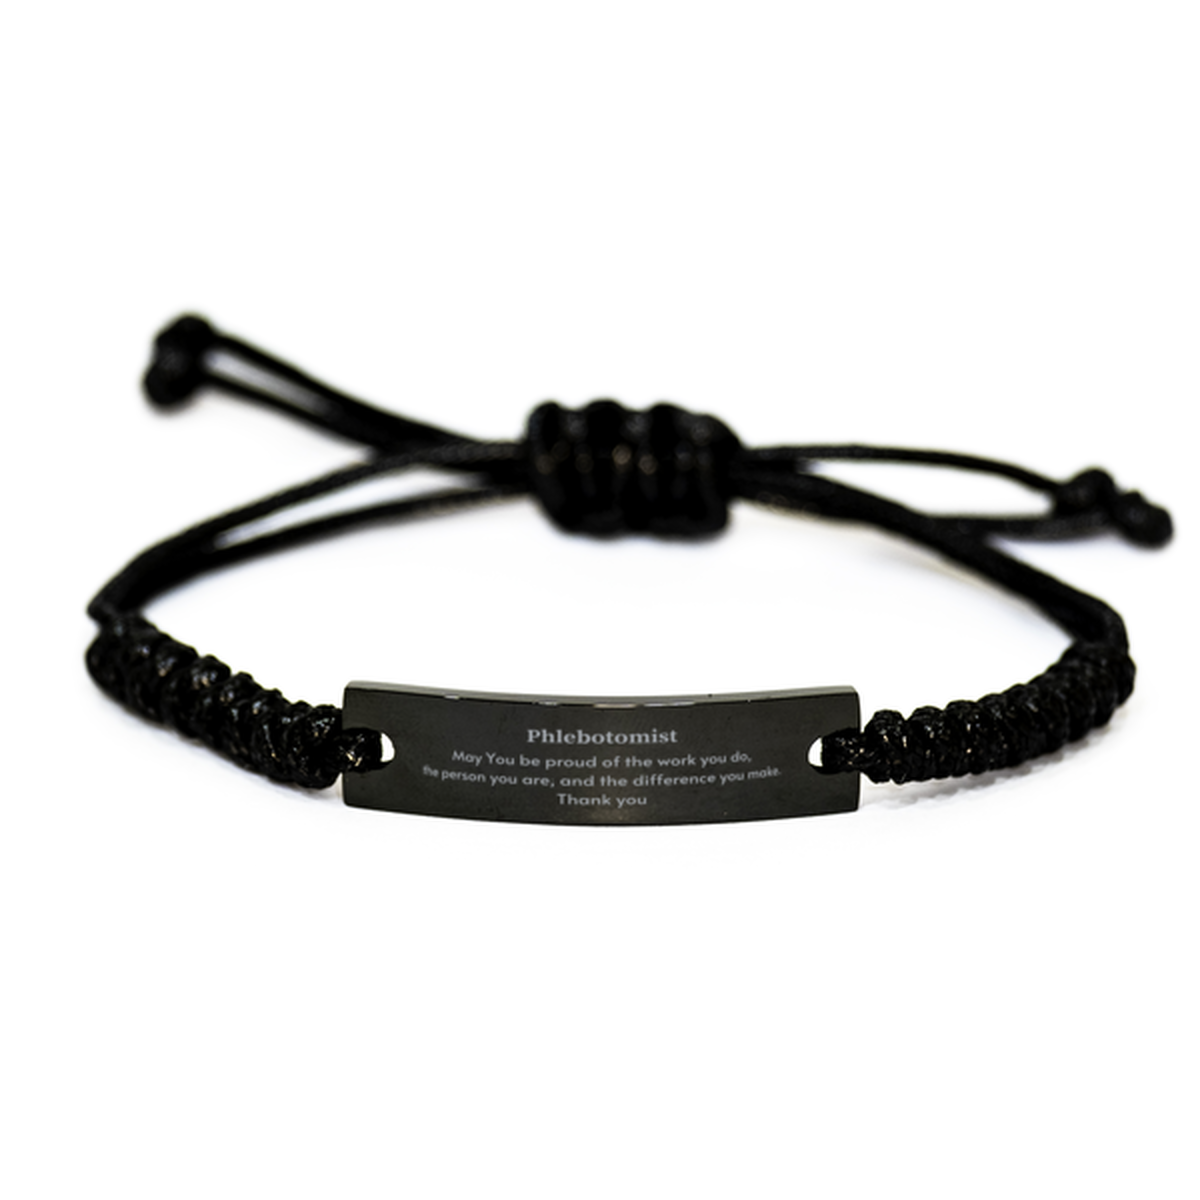 Heartwarming Black Rope Bracelet Retirement Coworkers Gifts for Phlebotomist, Phlebotomist May You be proud of the work you do, the person you are Gifts for Boss Men Women Friends